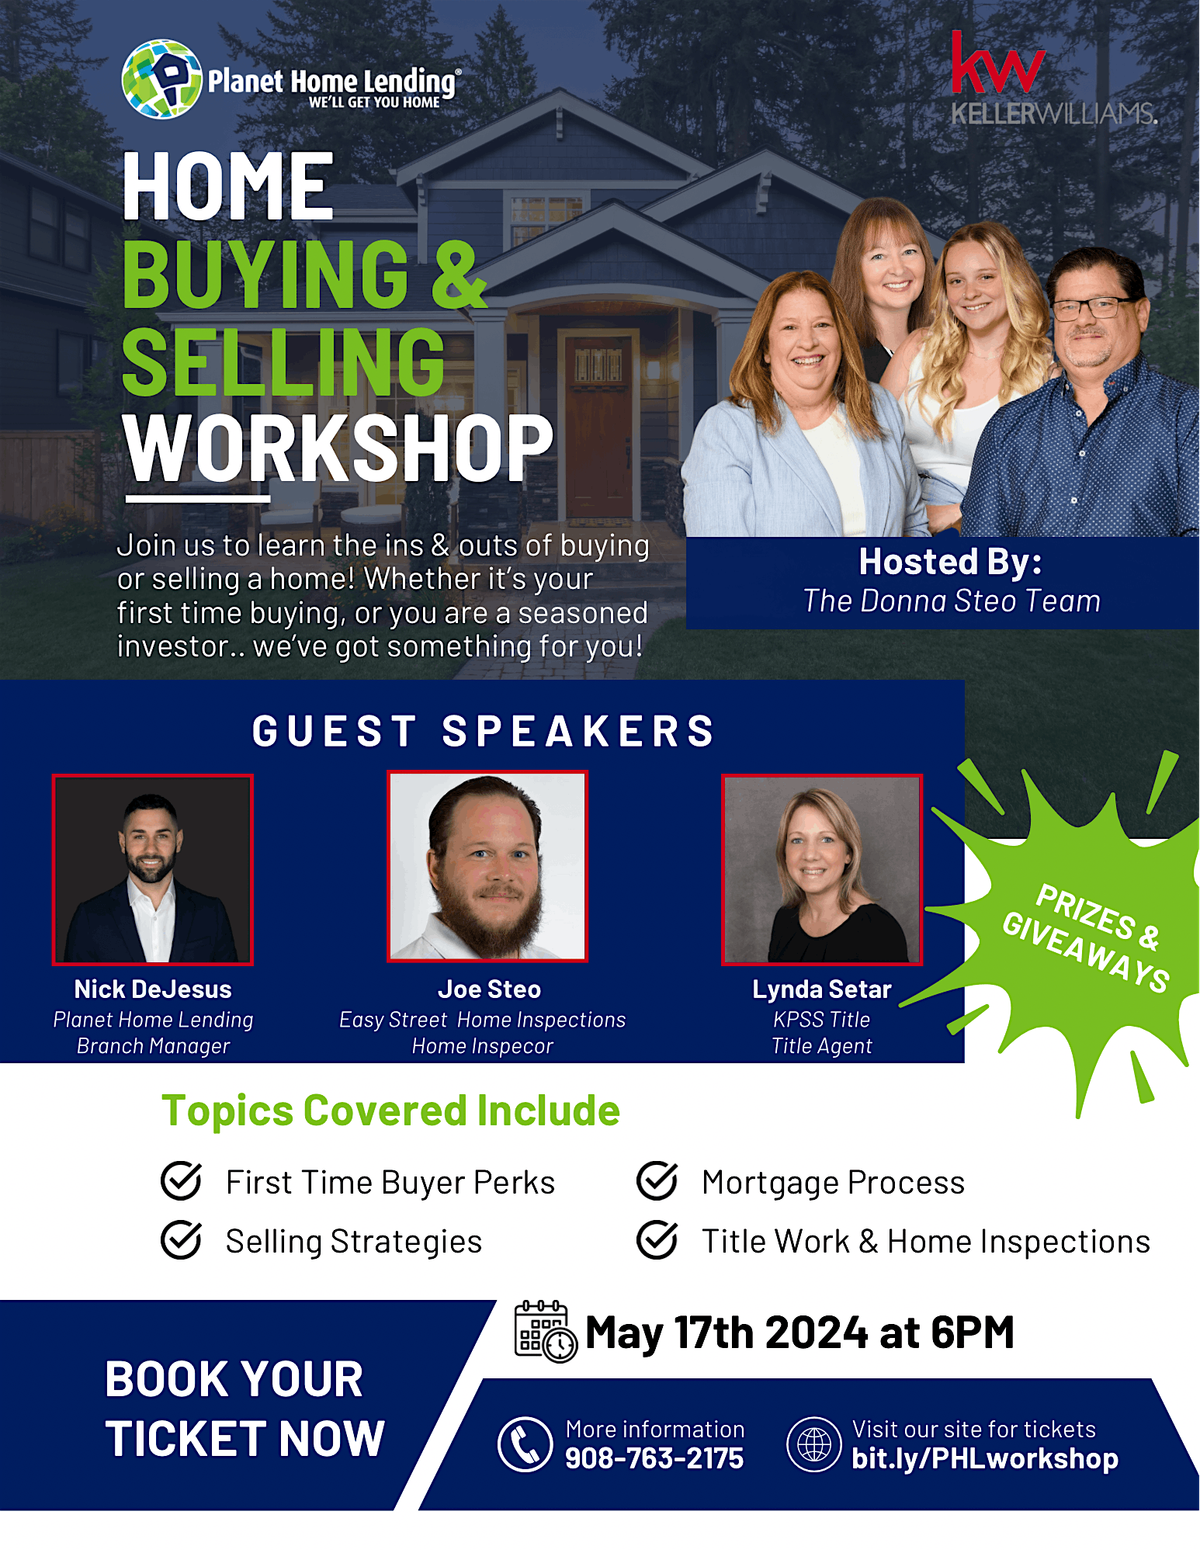 Home Buying & Selling Workshop